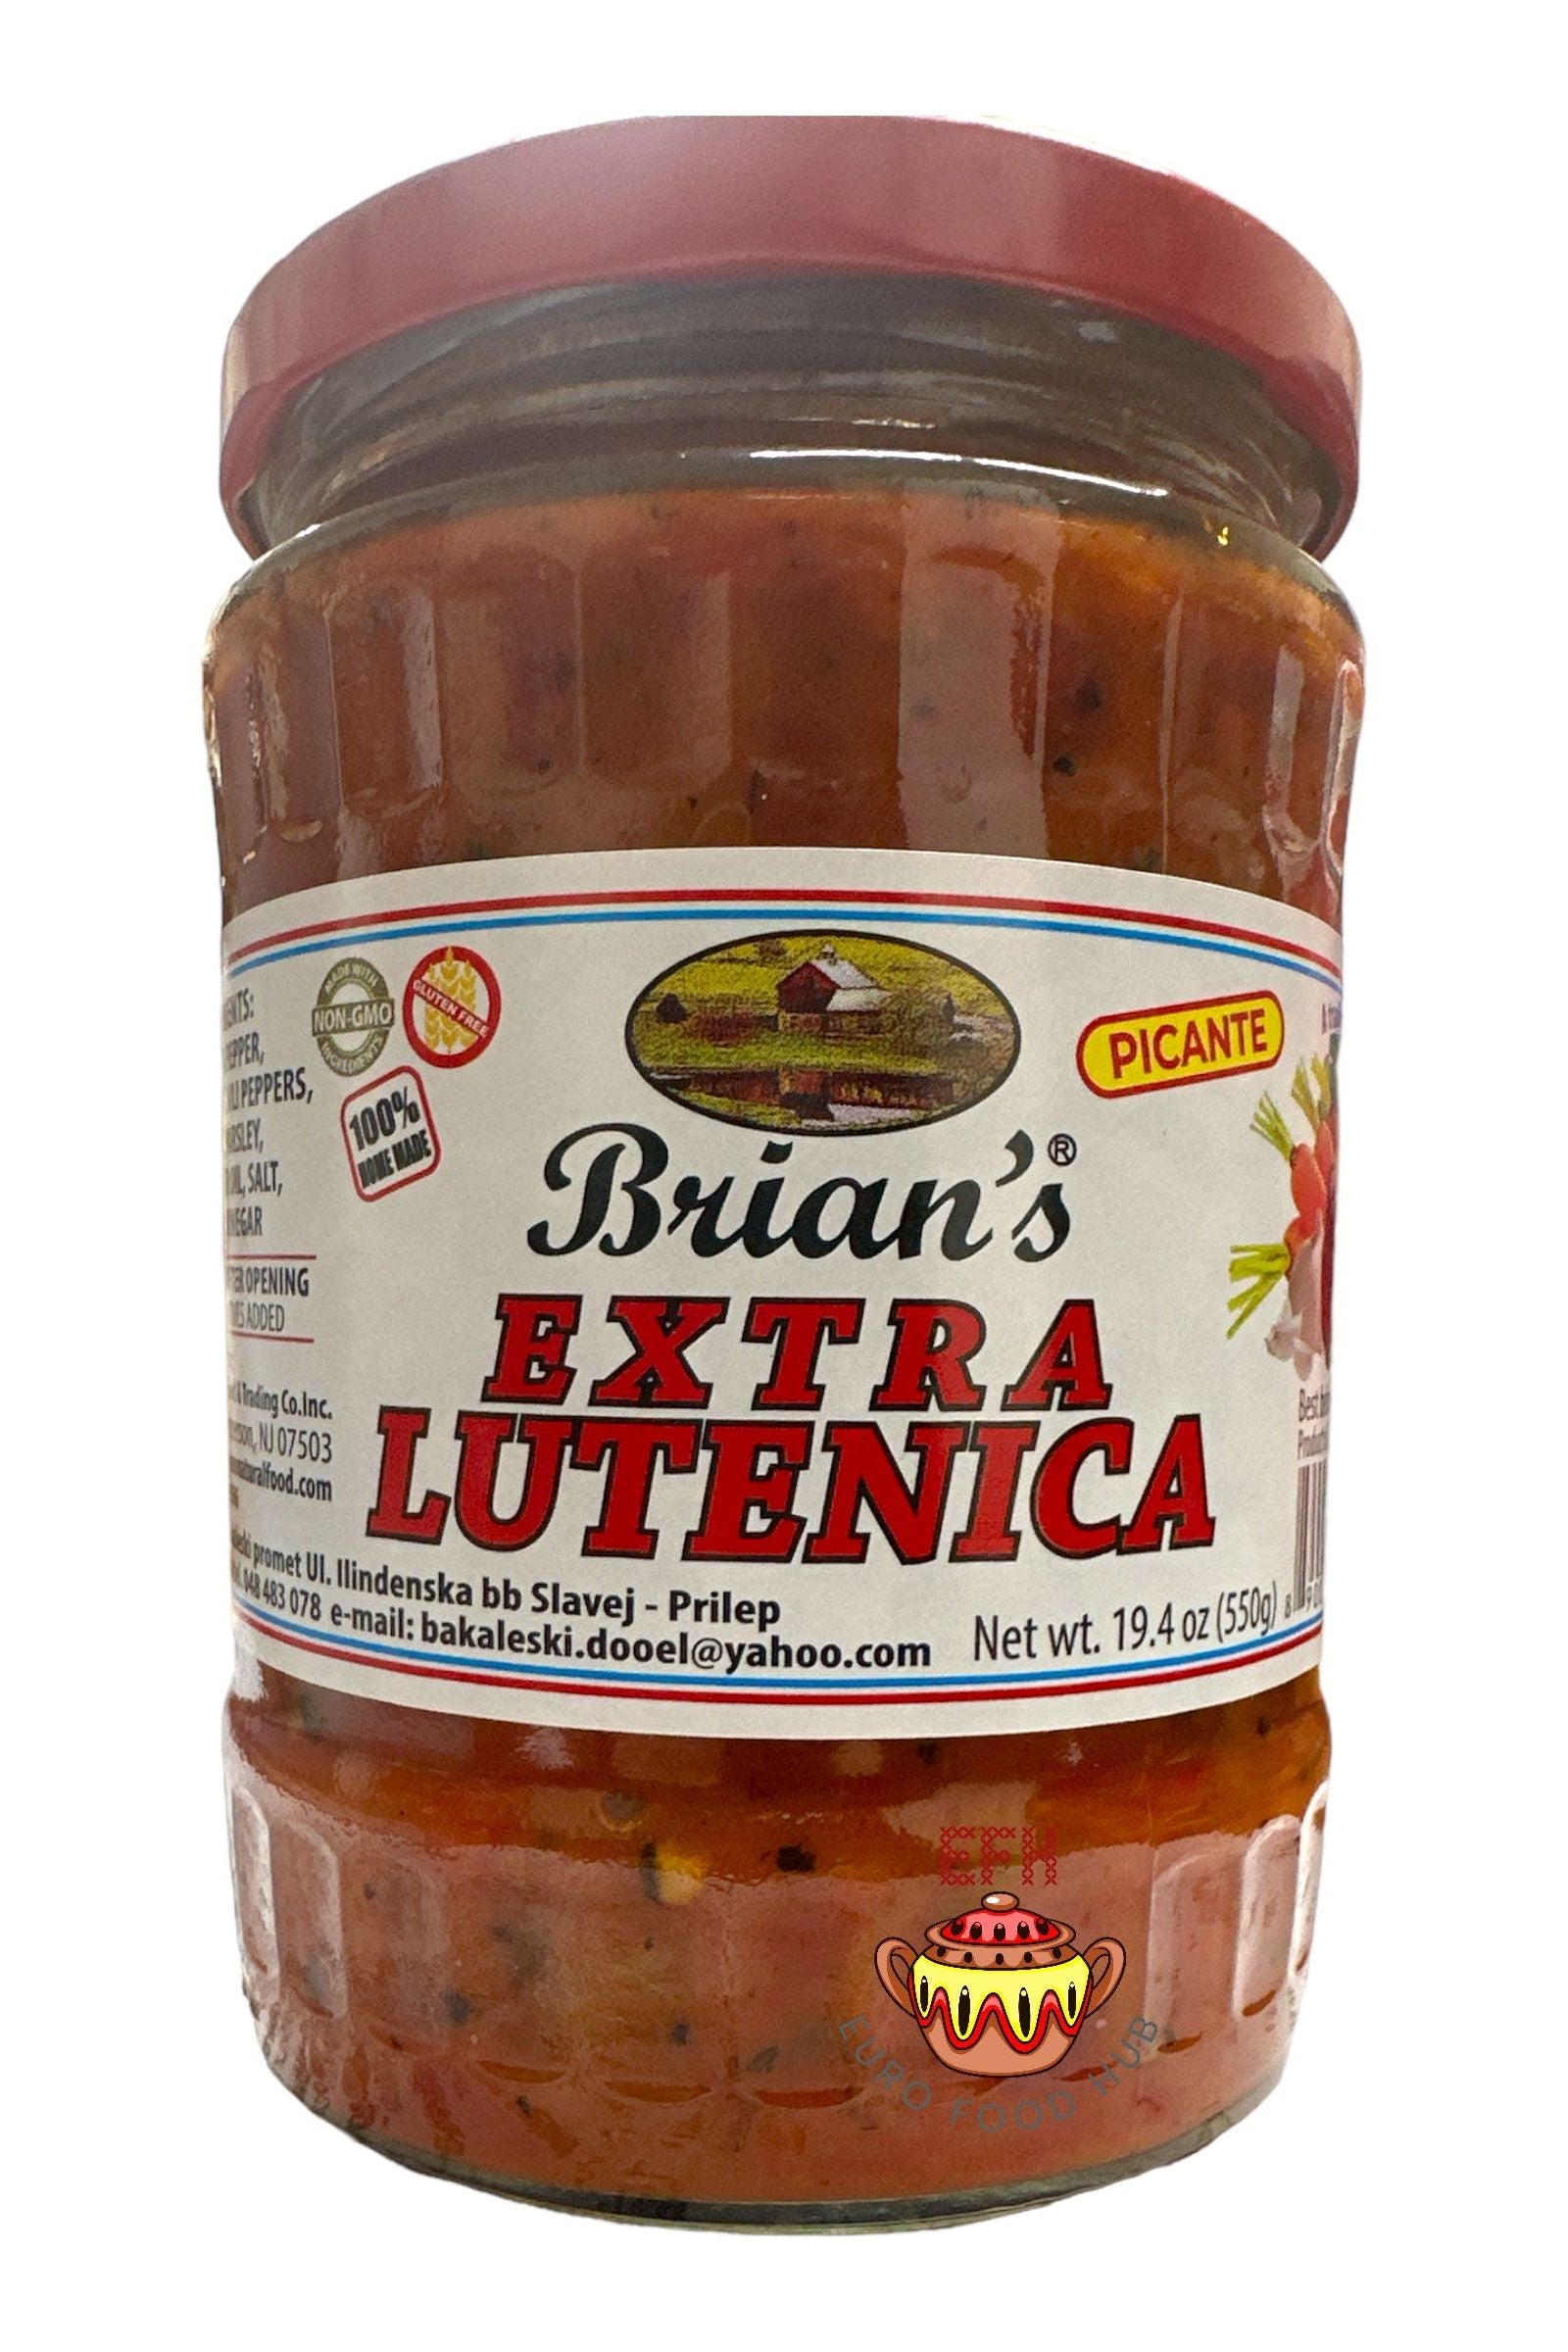 Brian's Extra Lutenica Picant - New Size Jar 580g